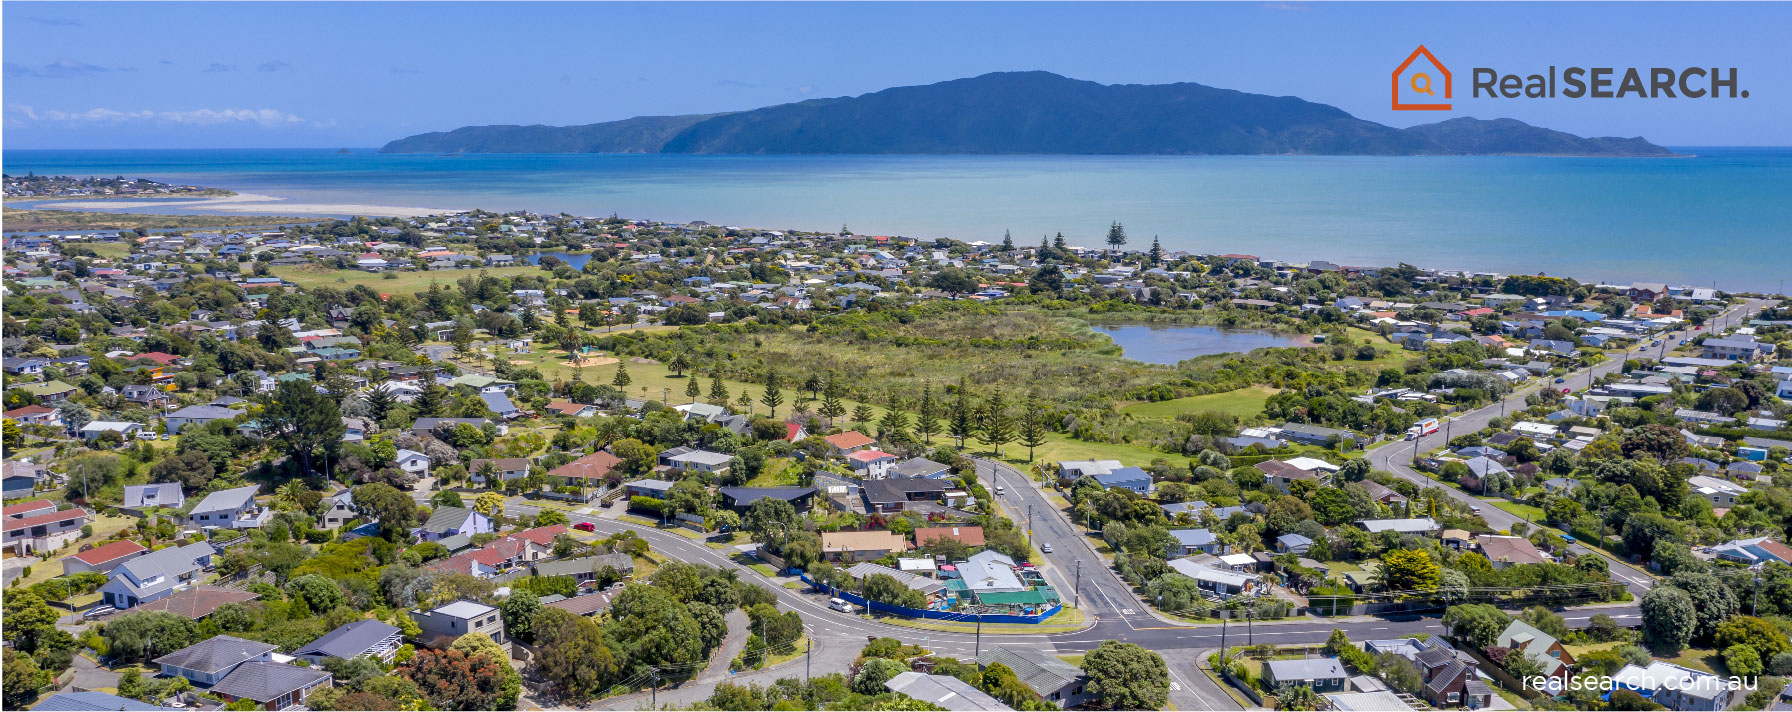 Explore the leading Australian suburbs with promising potential for property investments